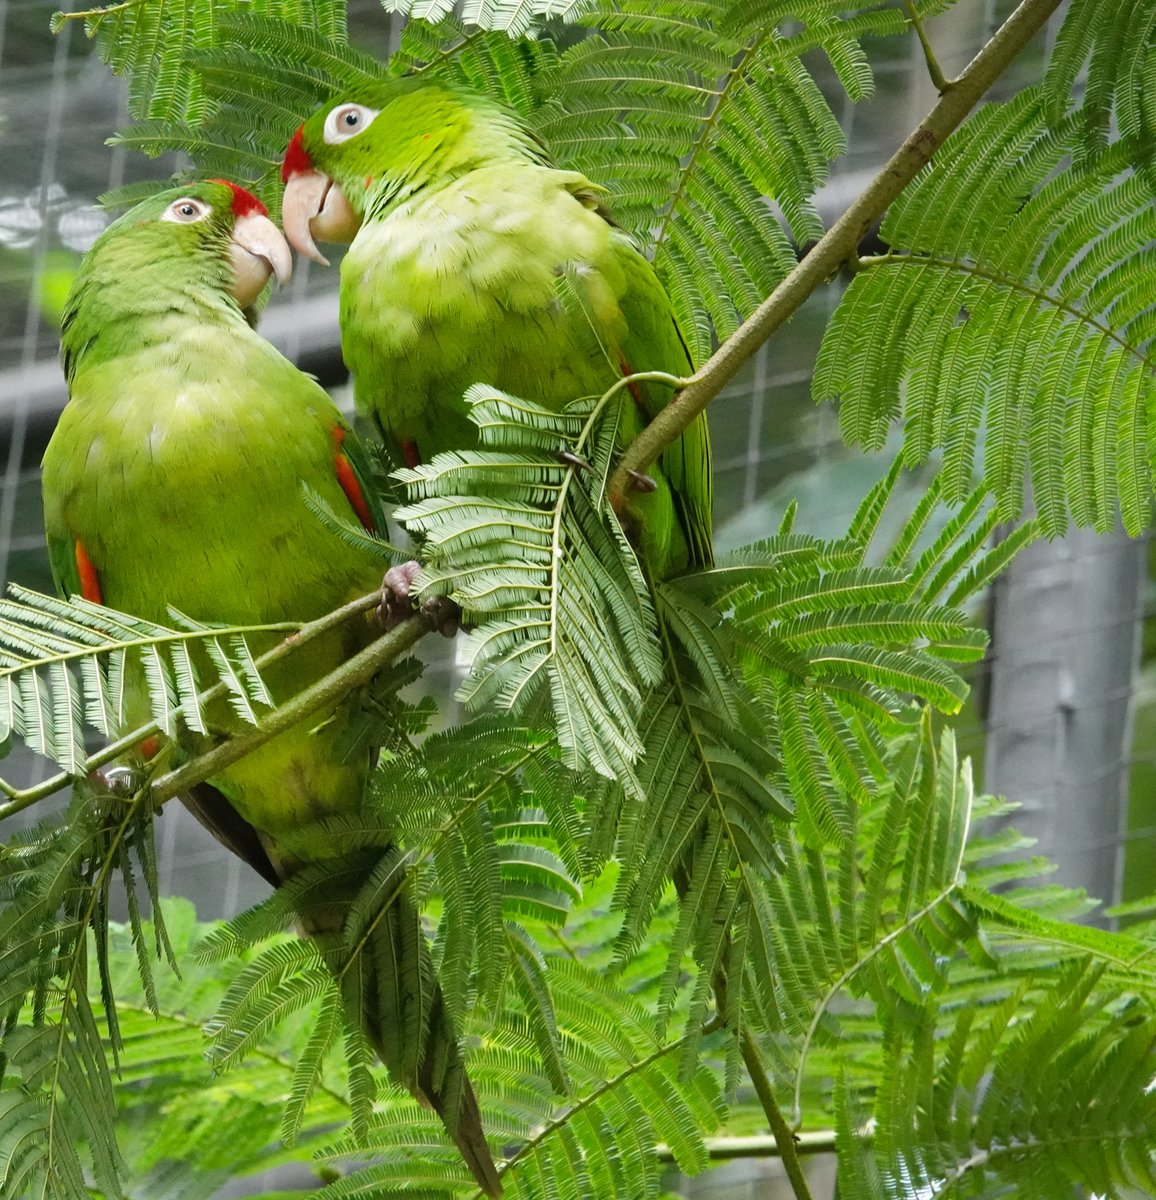 Very well blended [camouflage] Crimson fronted Parakeets La Garita, Costa Rica